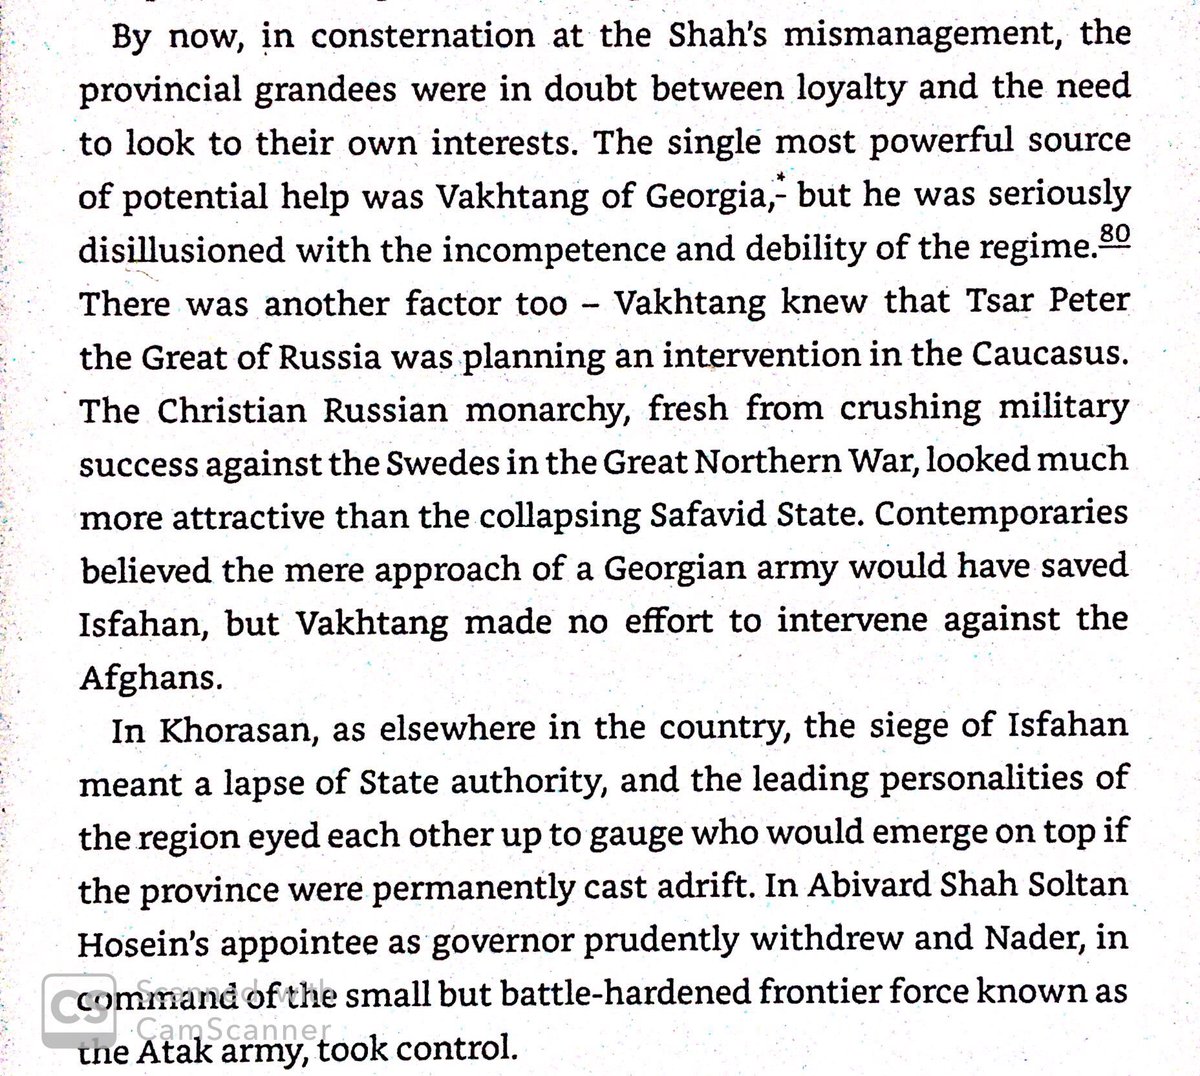 After the battled, Afghans besieged the Safavid Shah in Isfahan. Seeing the state collapse, the Georgians requested Russian intervention. Nader was still in Khorasan (NE Iran), & took control of a frontier army.